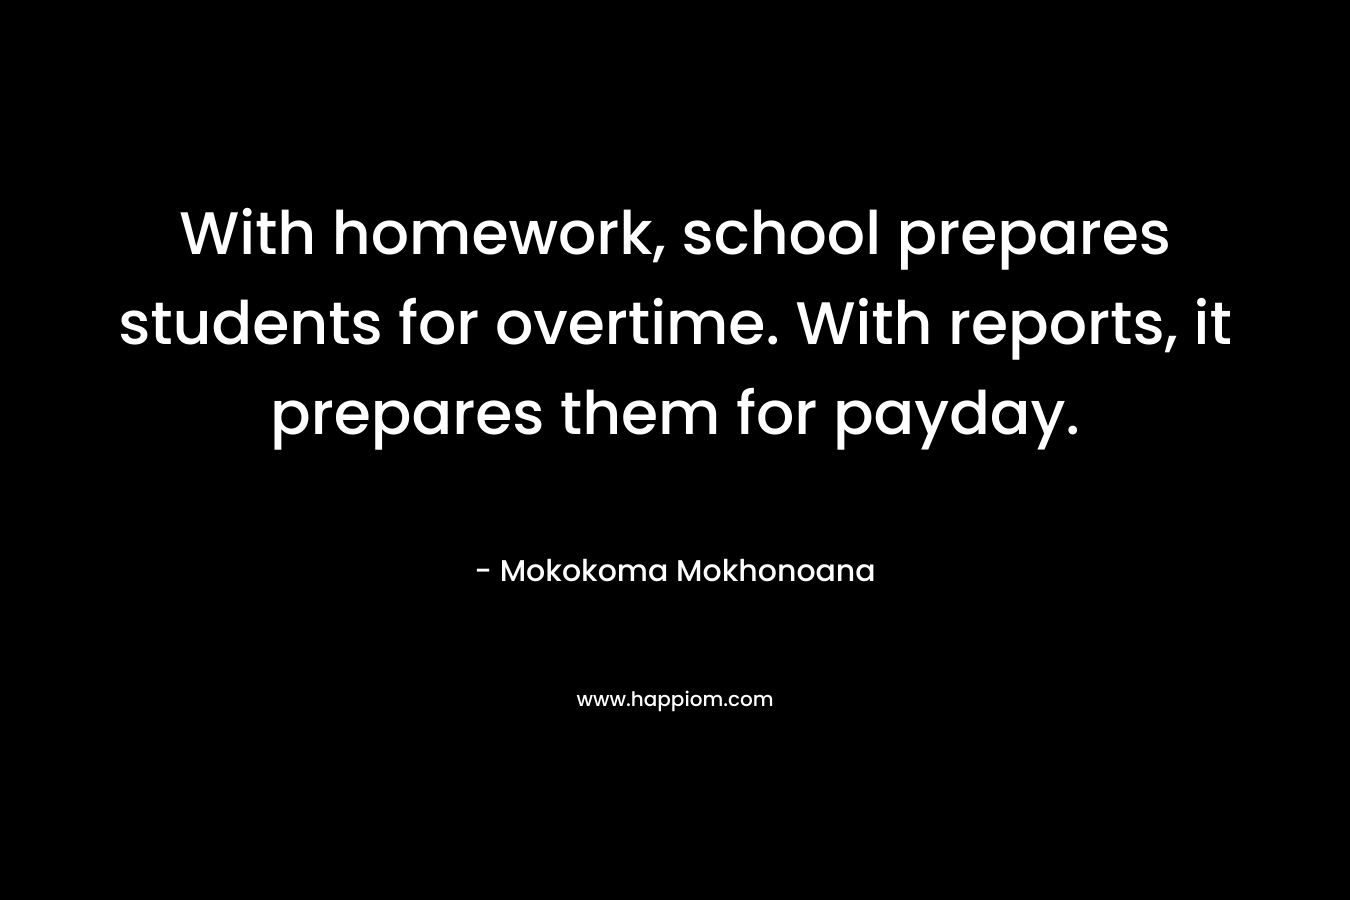 With homework, school prepares students for overtime. With reports, it prepares them for payday. – Mokokoma Mokhonoana